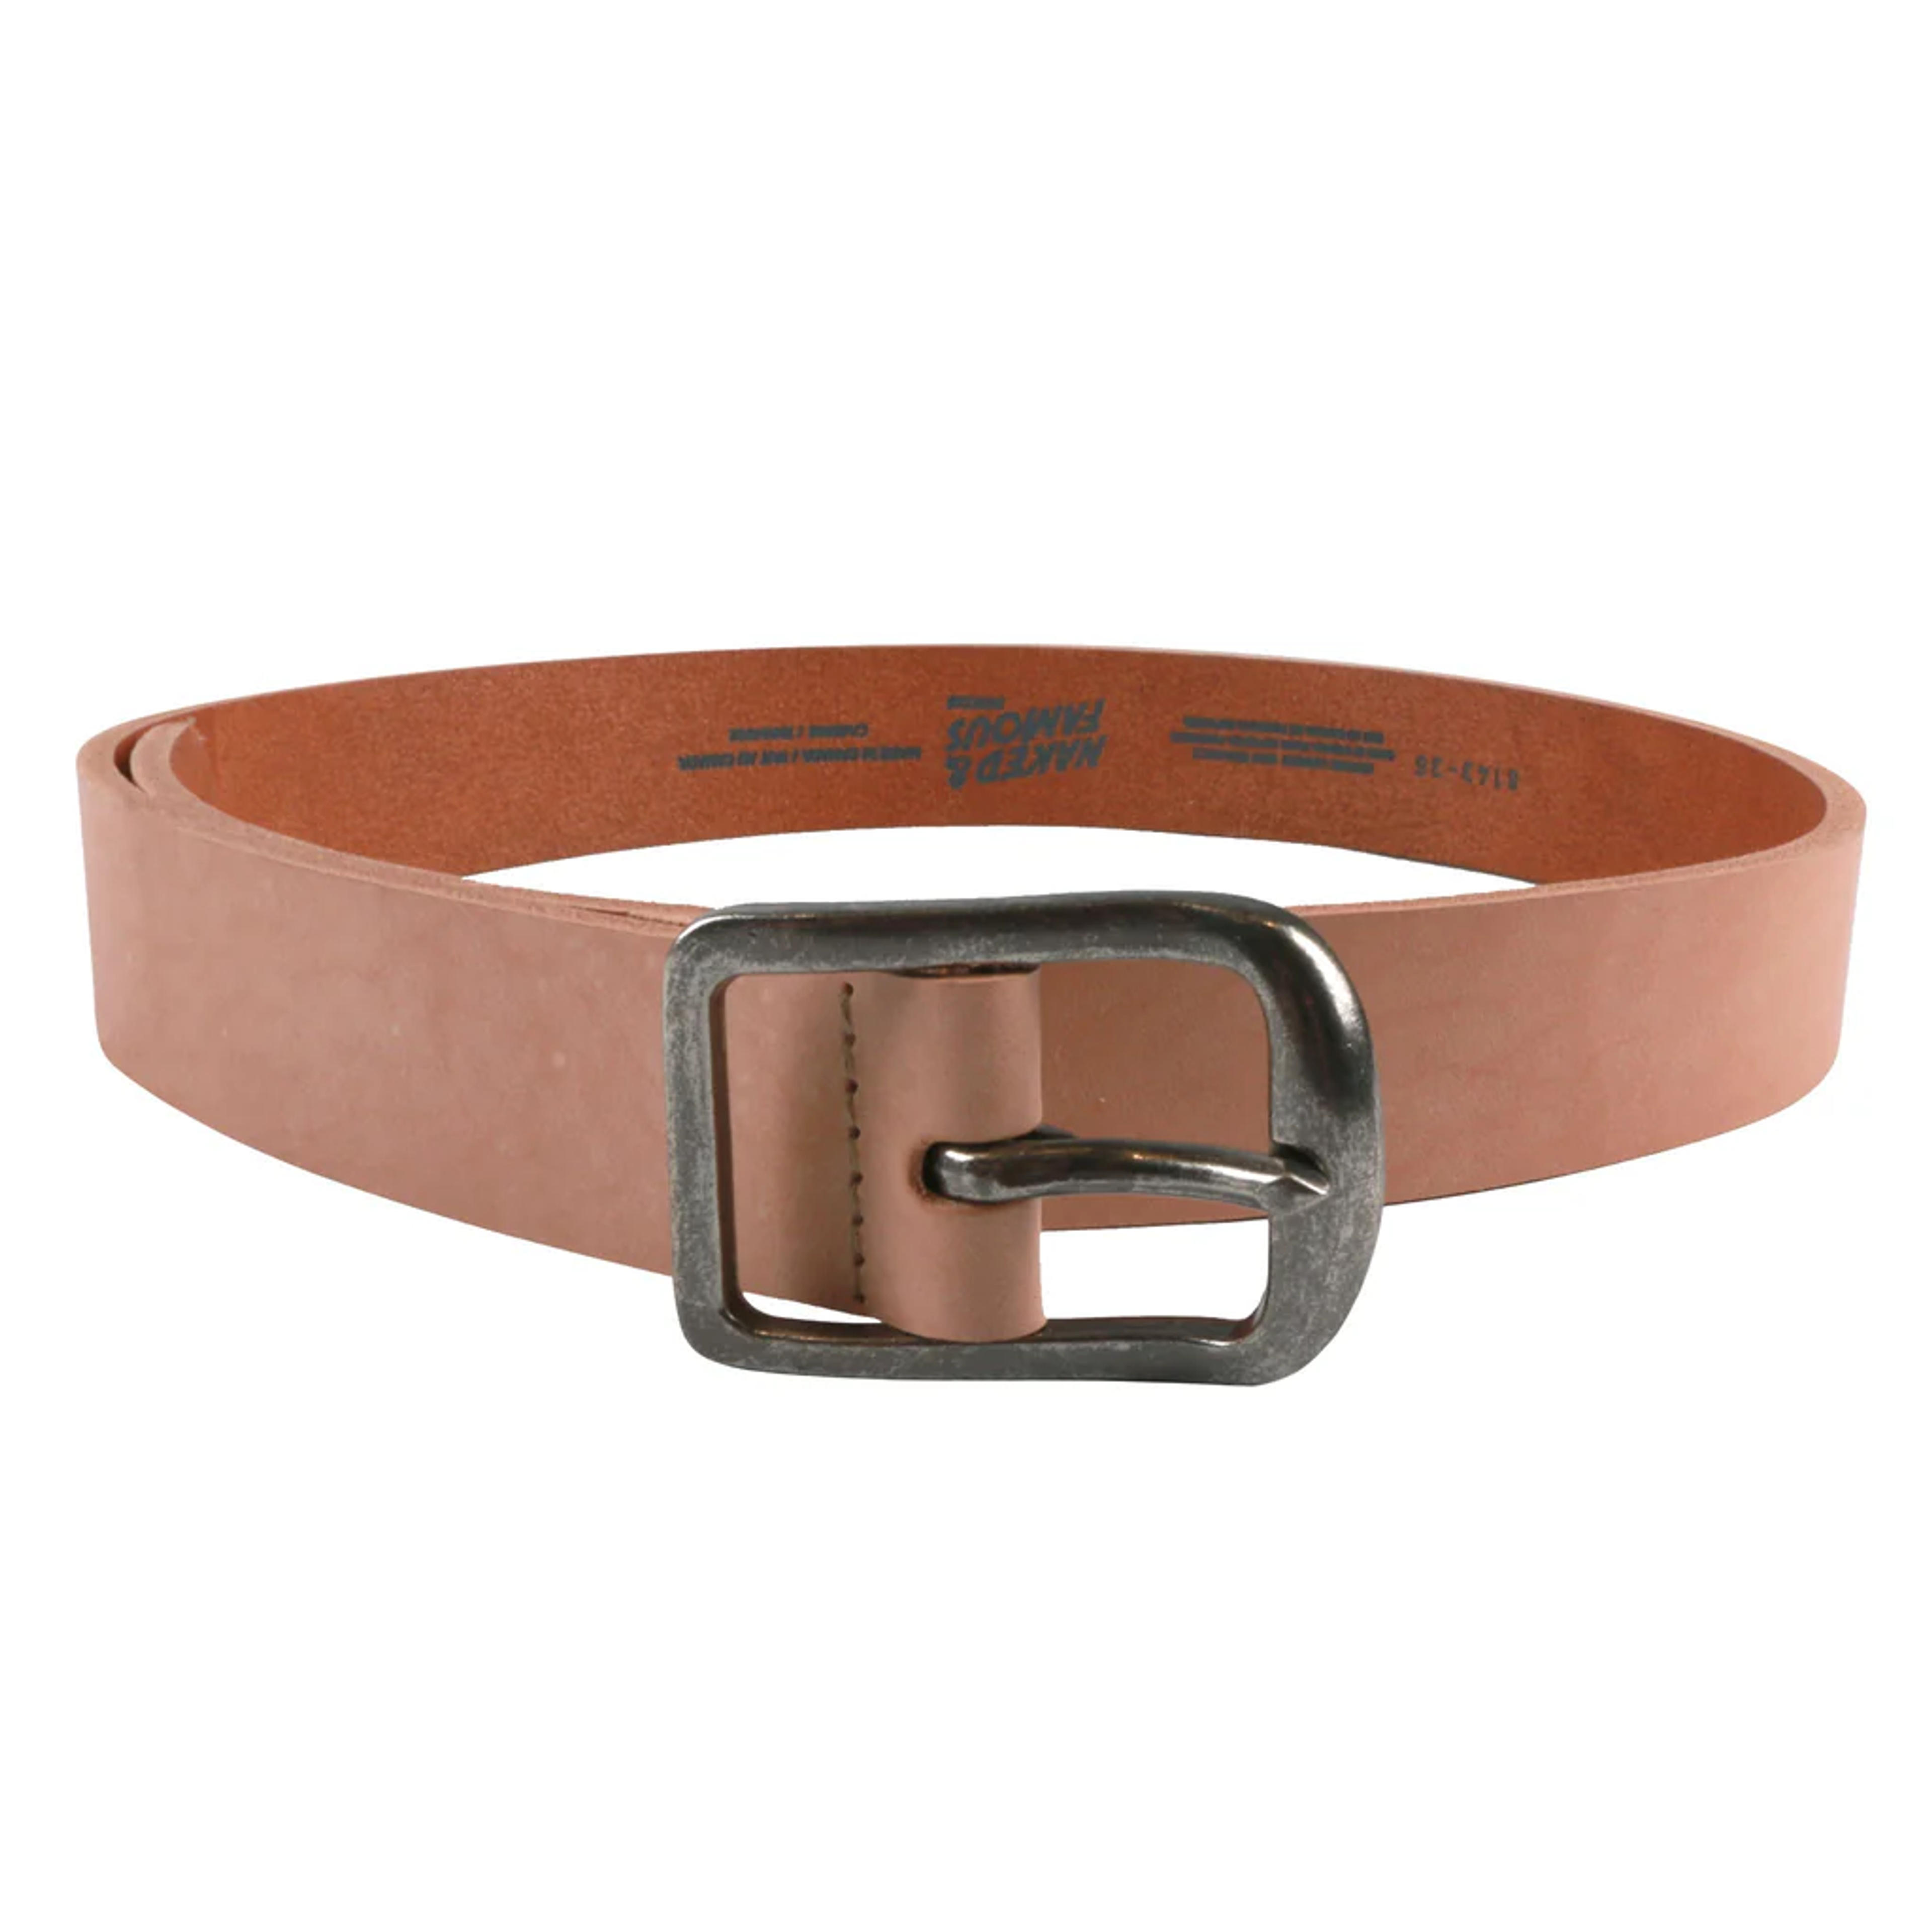 Thick Belt - 7mm Bovine Leather - Natural Tan